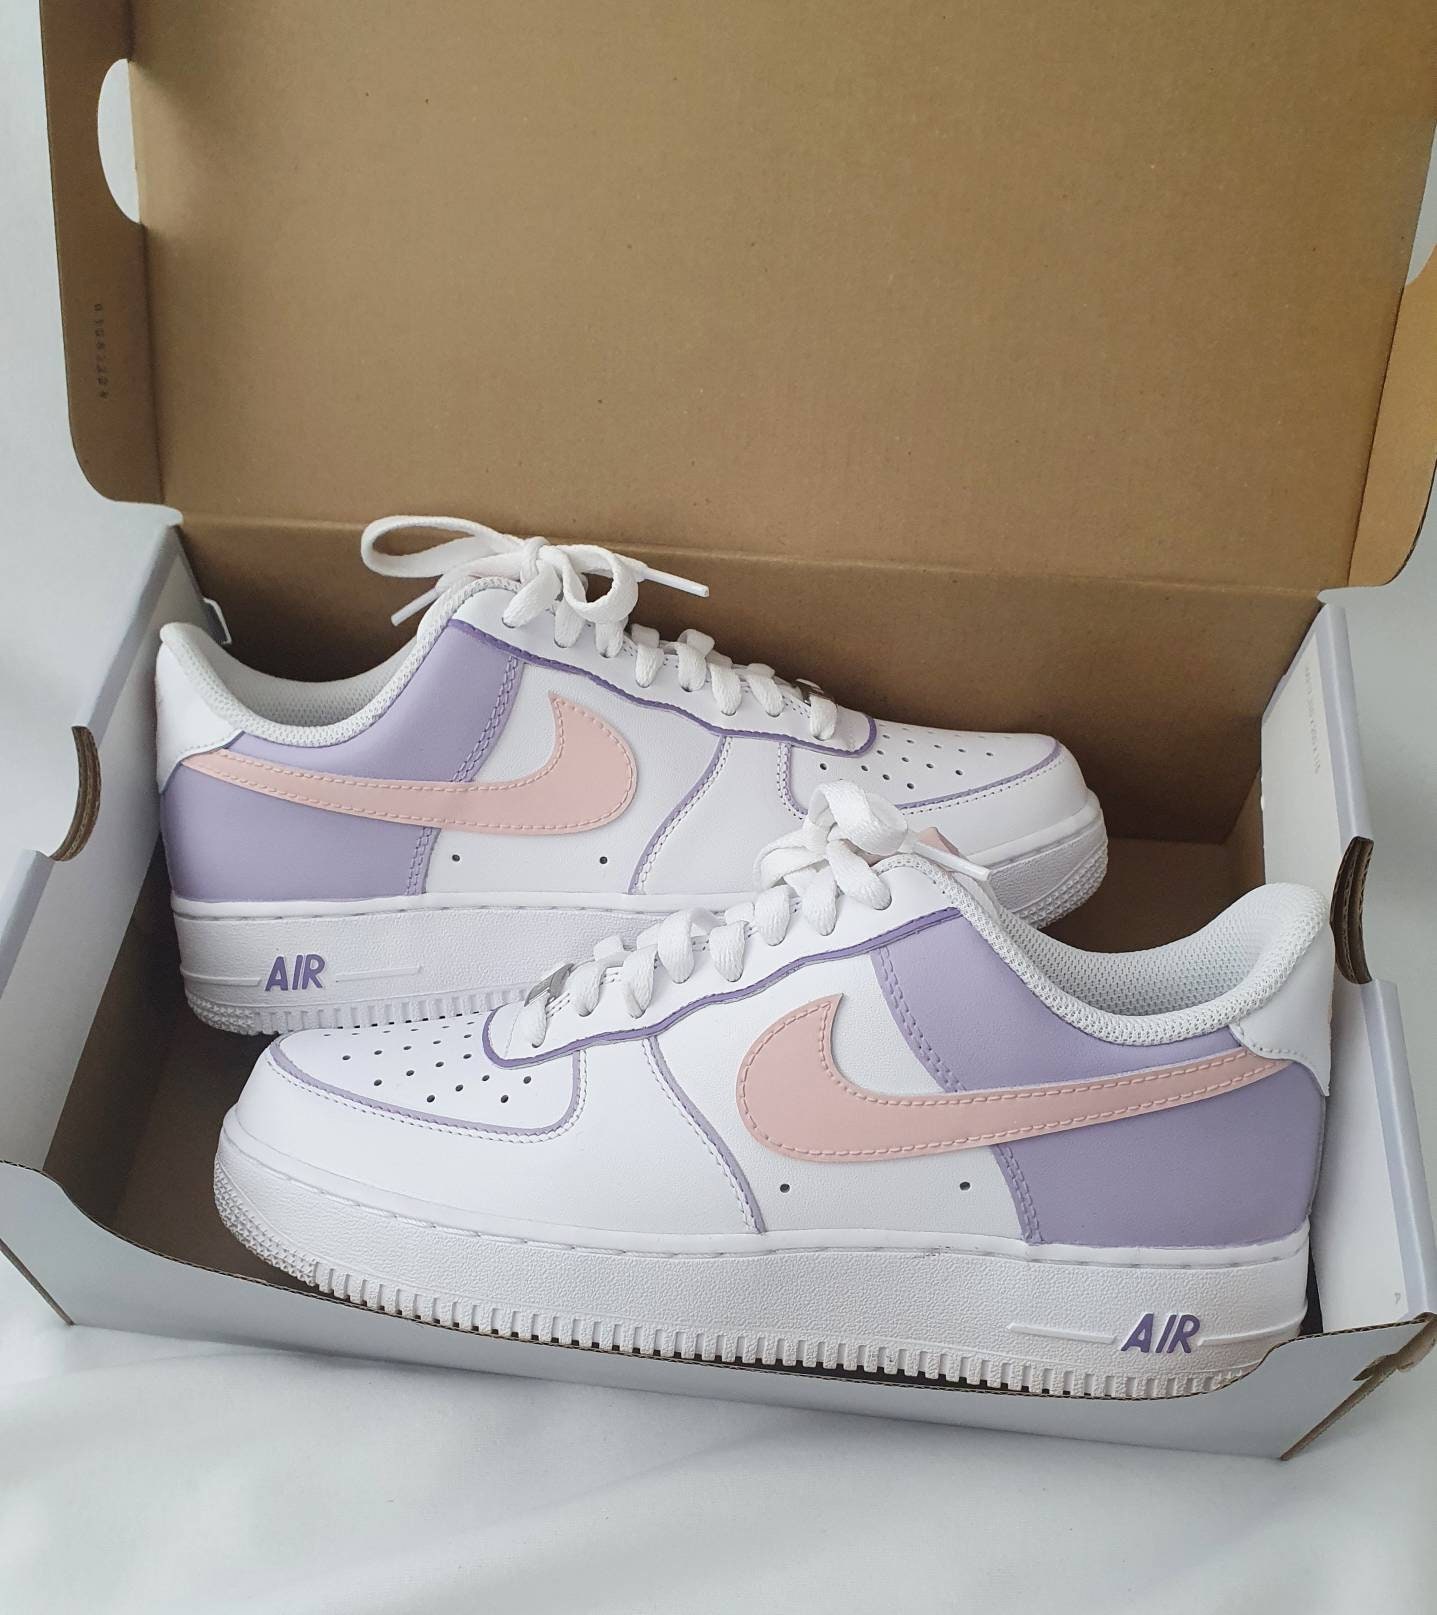 tv station Oproepen Agrarisch Nike Air Force 1 'blossom' - Etsy